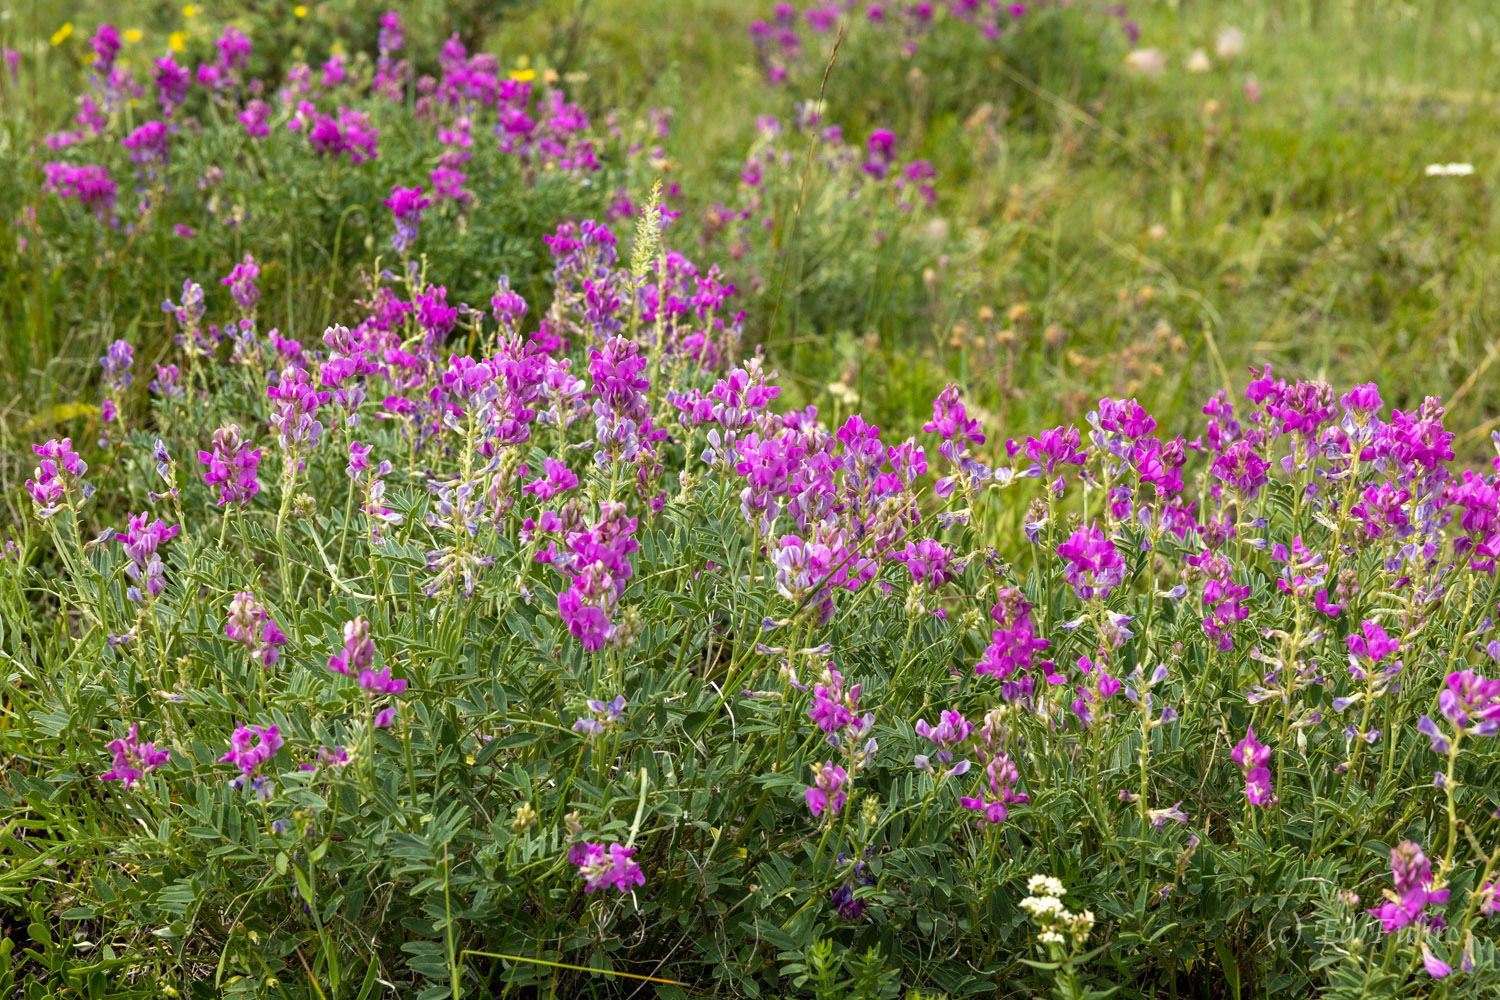 After the snows recede in early July, countless alpine wildflowers quickly emerge in the short growing season that characterize...